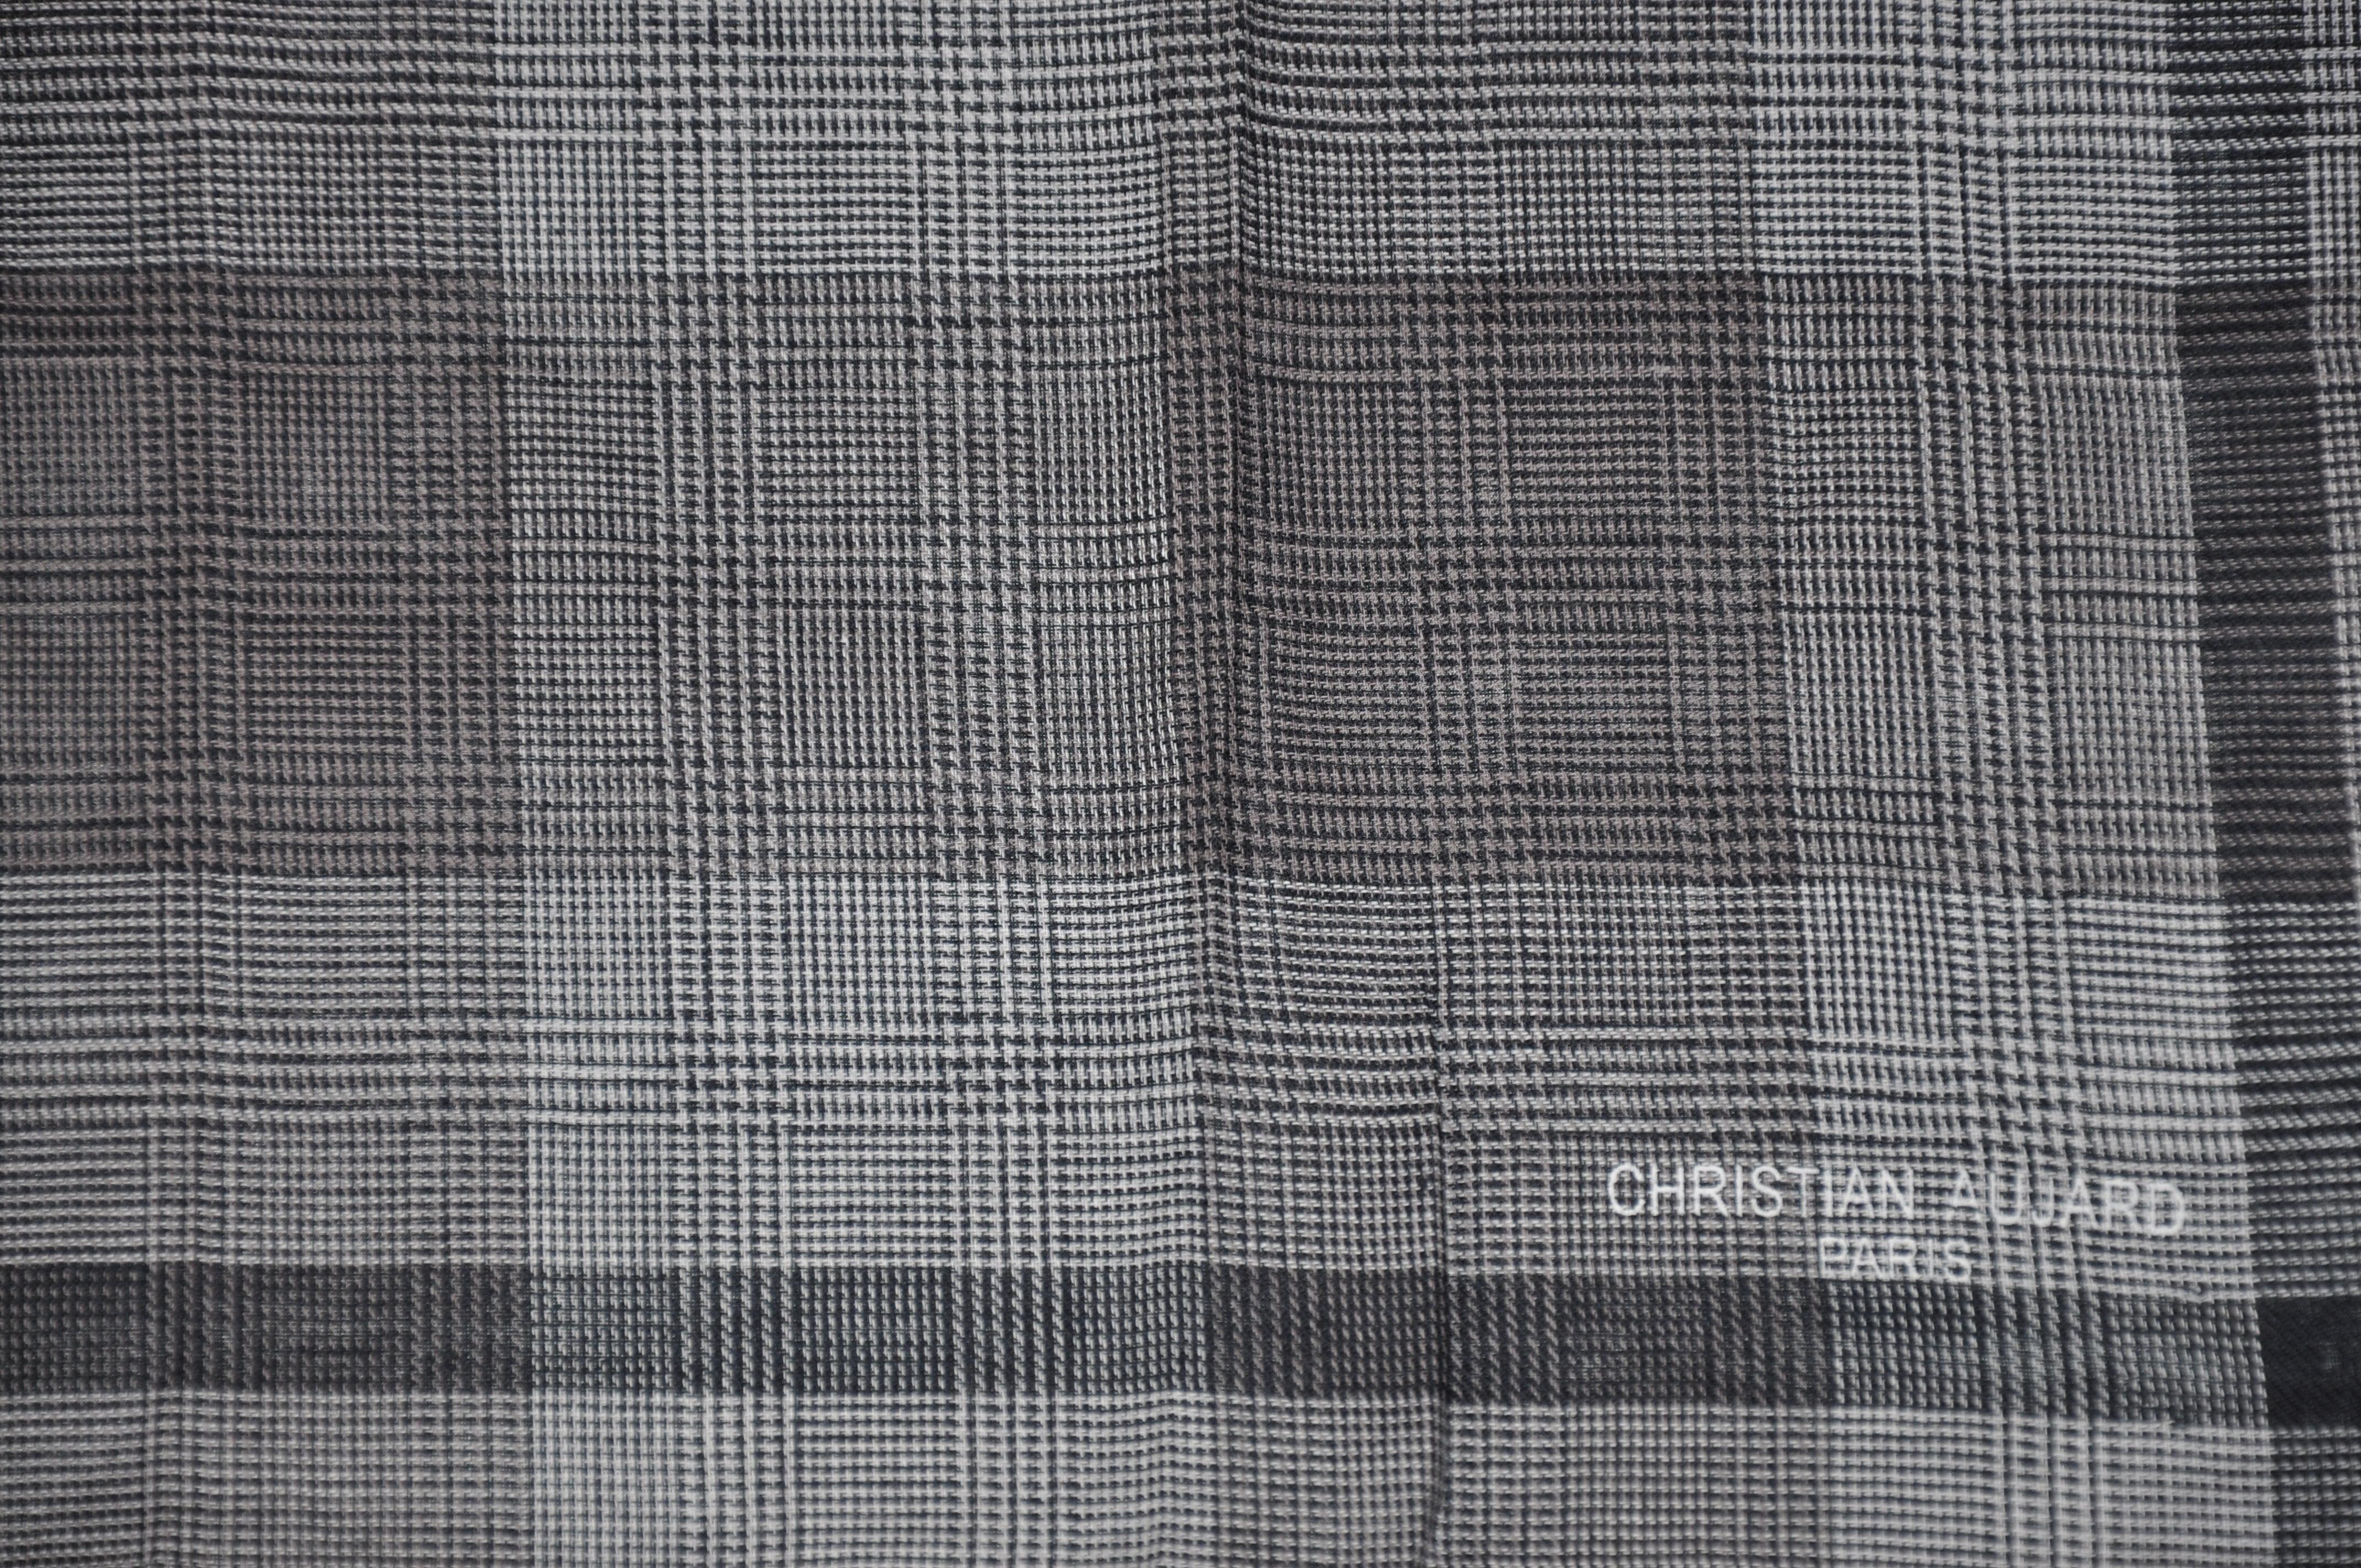 Women's or Men's Christian Aujard Shades of Gray Micro Checkered Cotton Handkerchief For Sale